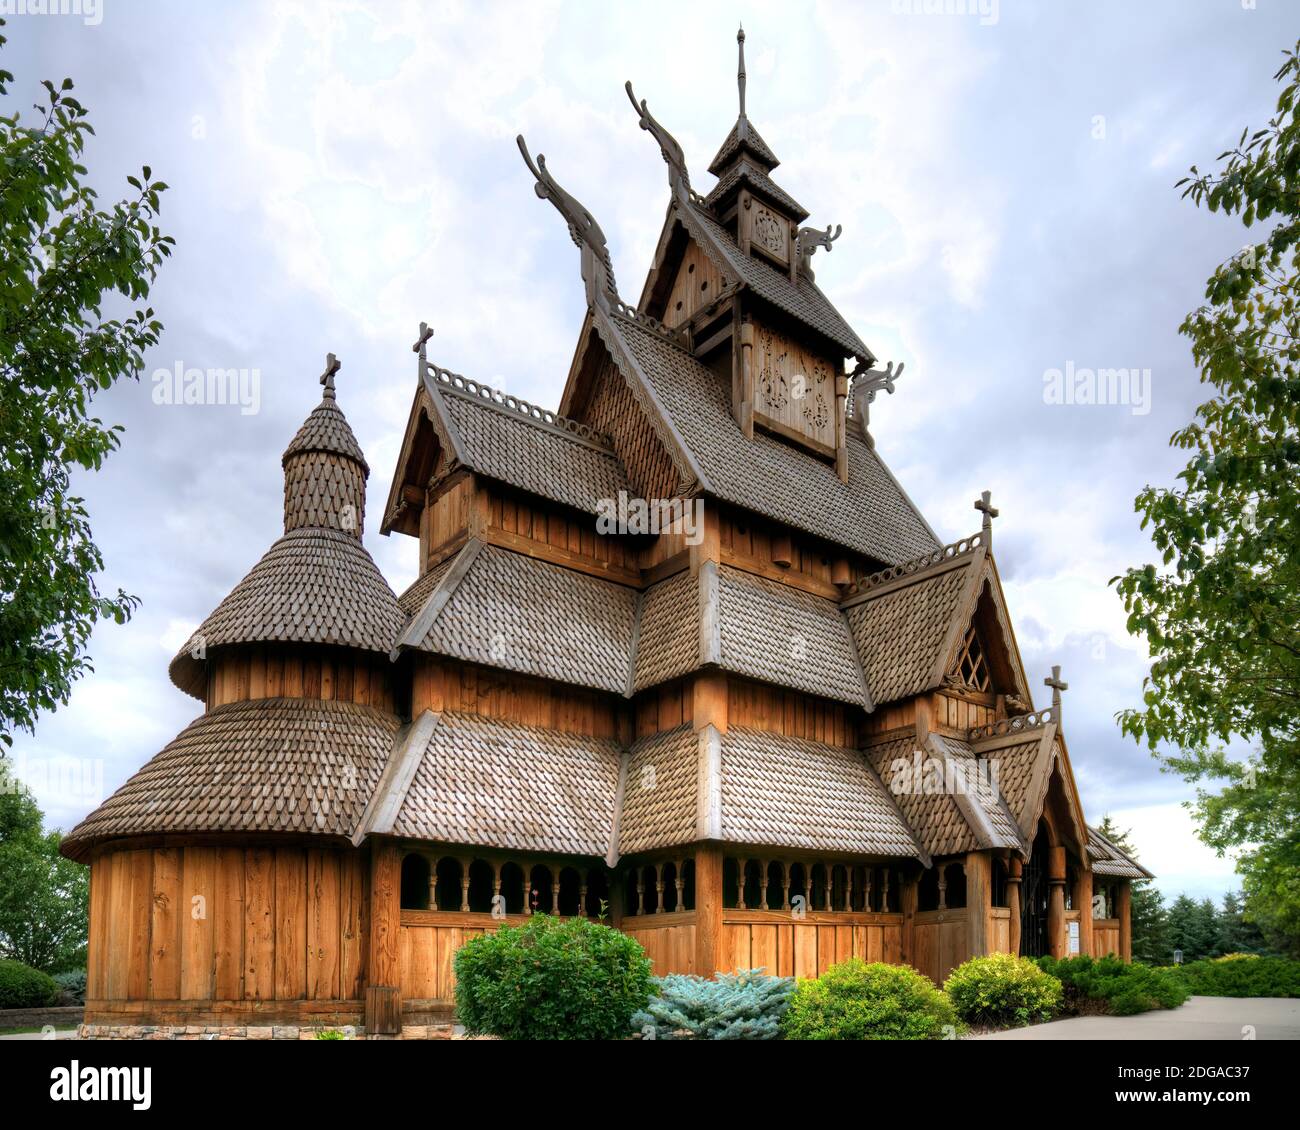 The Gol Stave Church Museum is Minot, ND is a replica of a 13th century Norwegian church. It is located in Minot's Scandinavian Heritage Park. Stock Photo